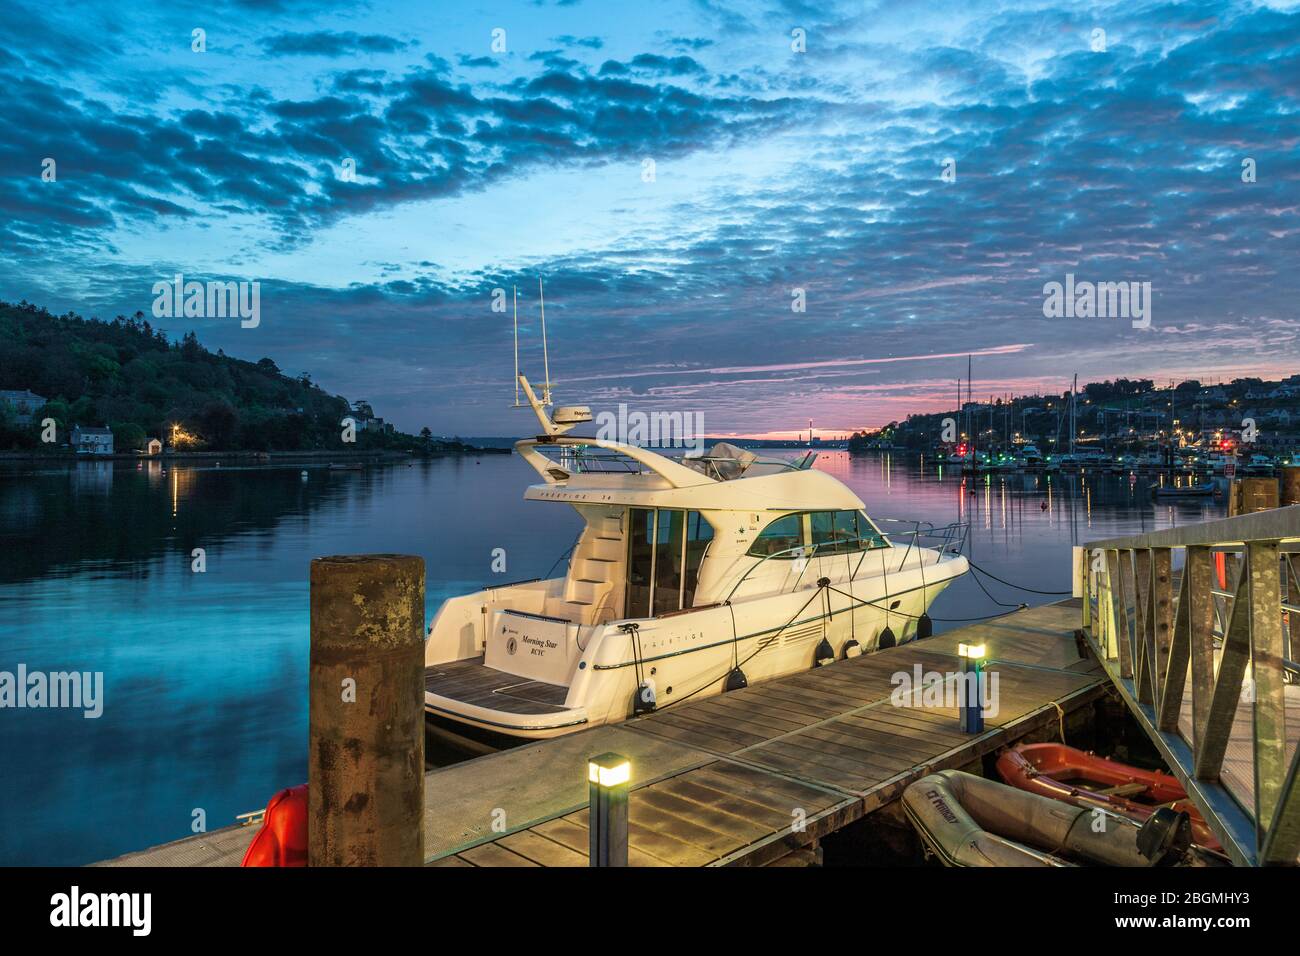 Crosshaven, Cork, Ireland. 22nd April, 2020. Motor boat Morning Star berthed at the Hugh Coveney Pier before dawn at the picturesque village of Crosshaven, Co. Cork, Ireland. - Credit; David Creedon / Alamy Live News Stock Photo